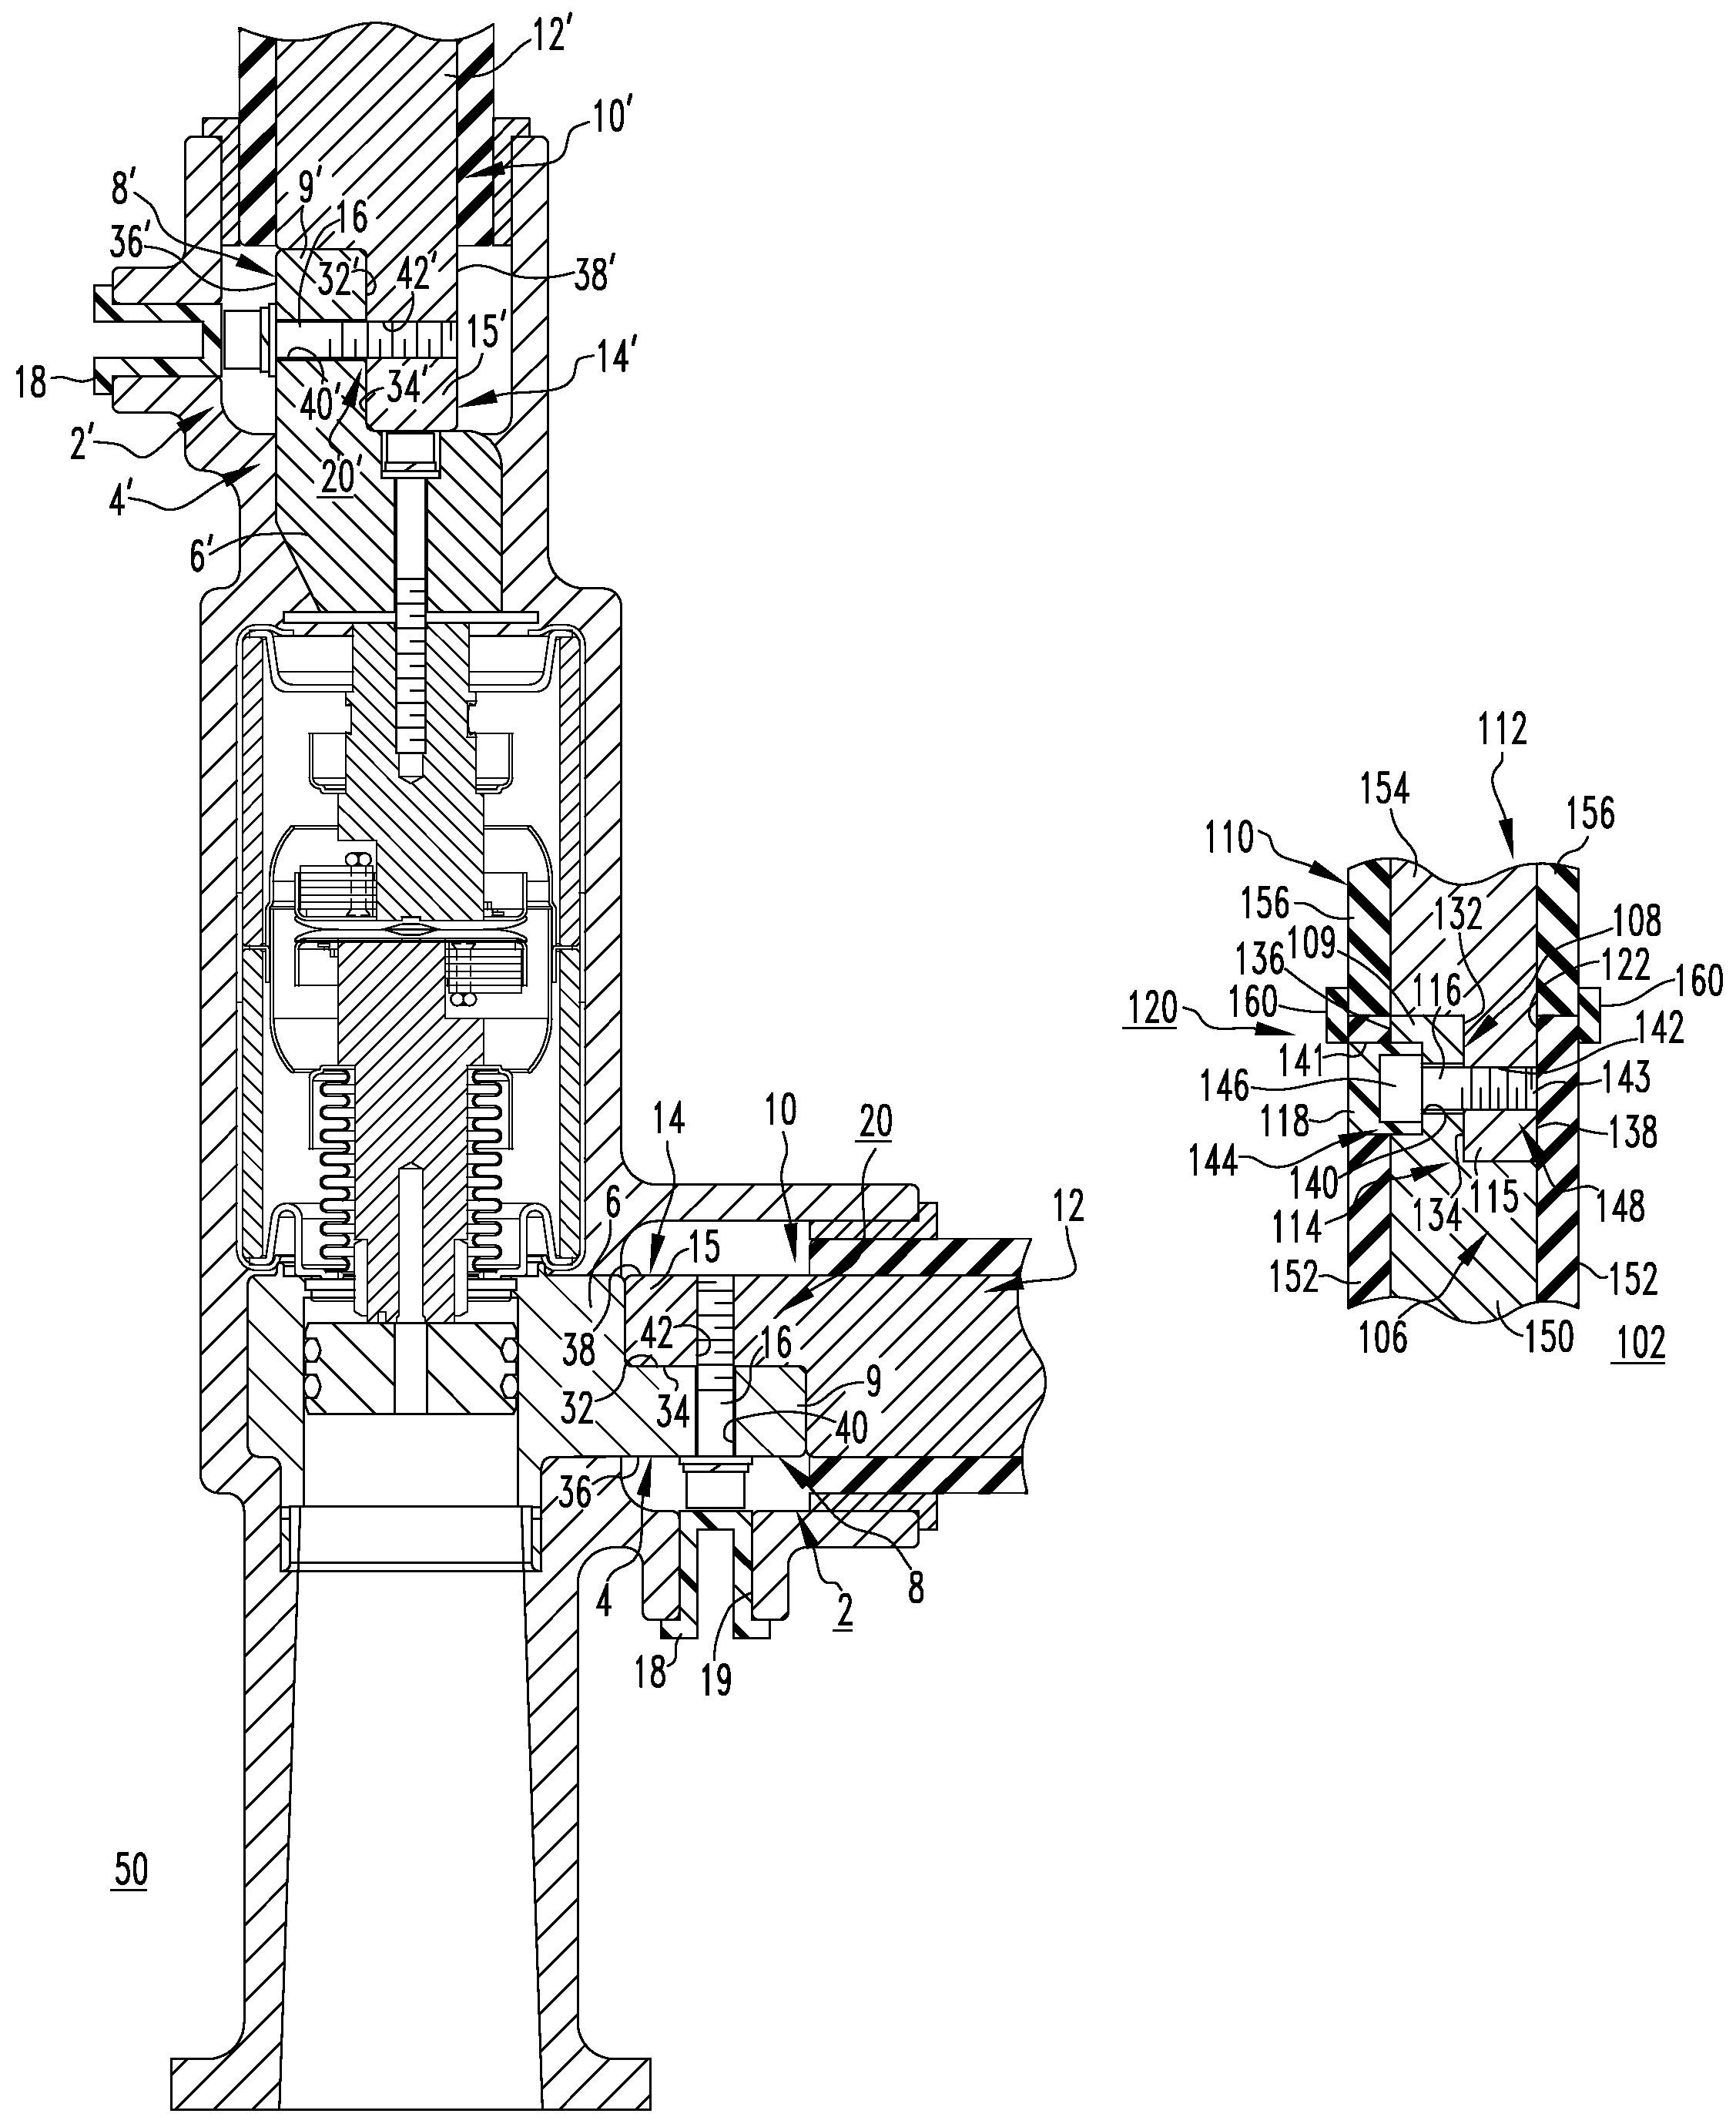 Electrically insulated conductor connection assemblies and associated method